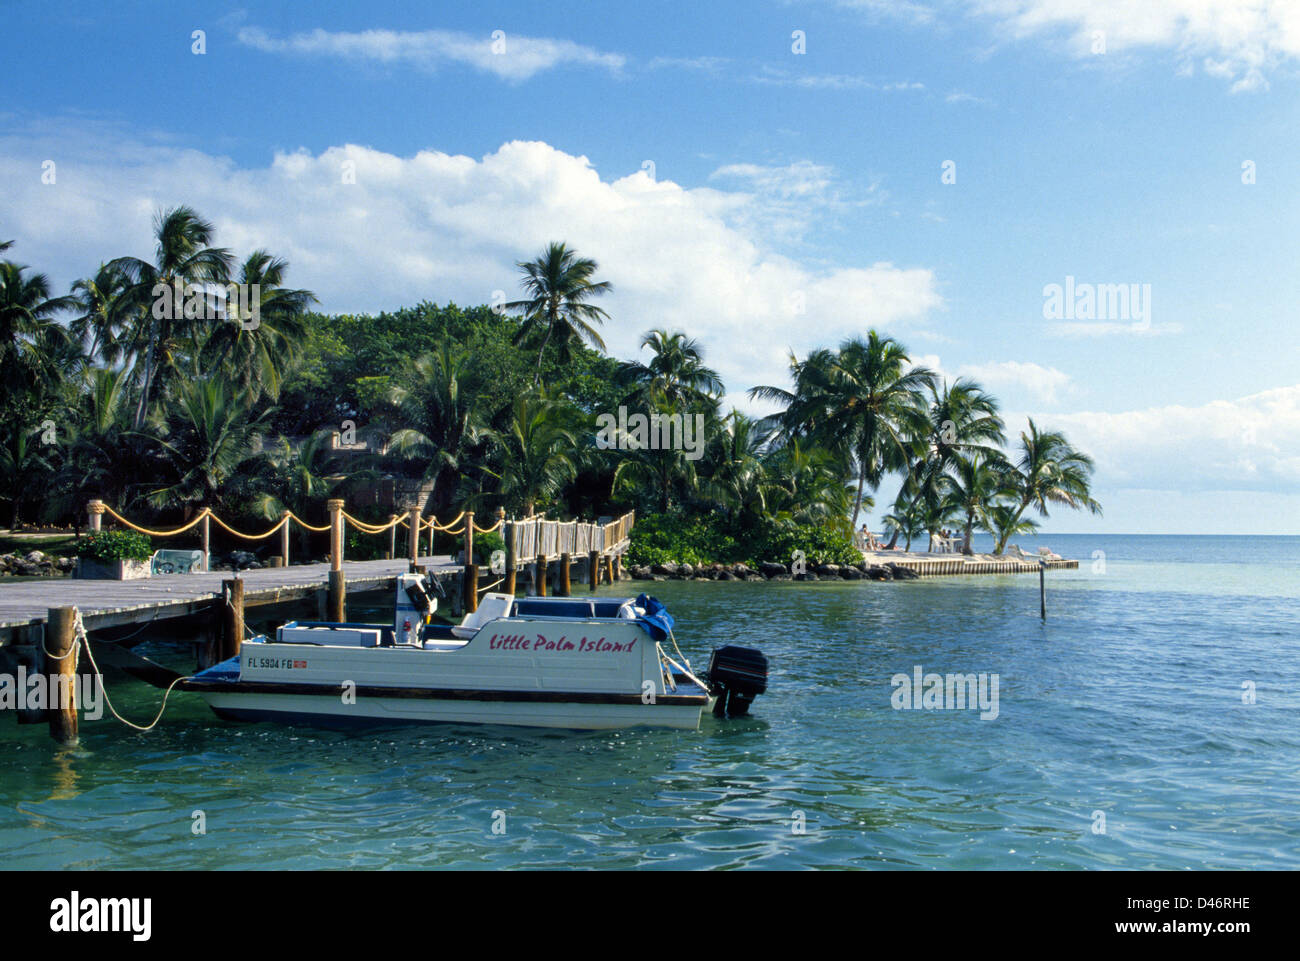 Guests enjoy tropical accommodations at Little Palm Island Resort, a brief boat ride from Little Torch Key in the Florida Keys. Stock Photo